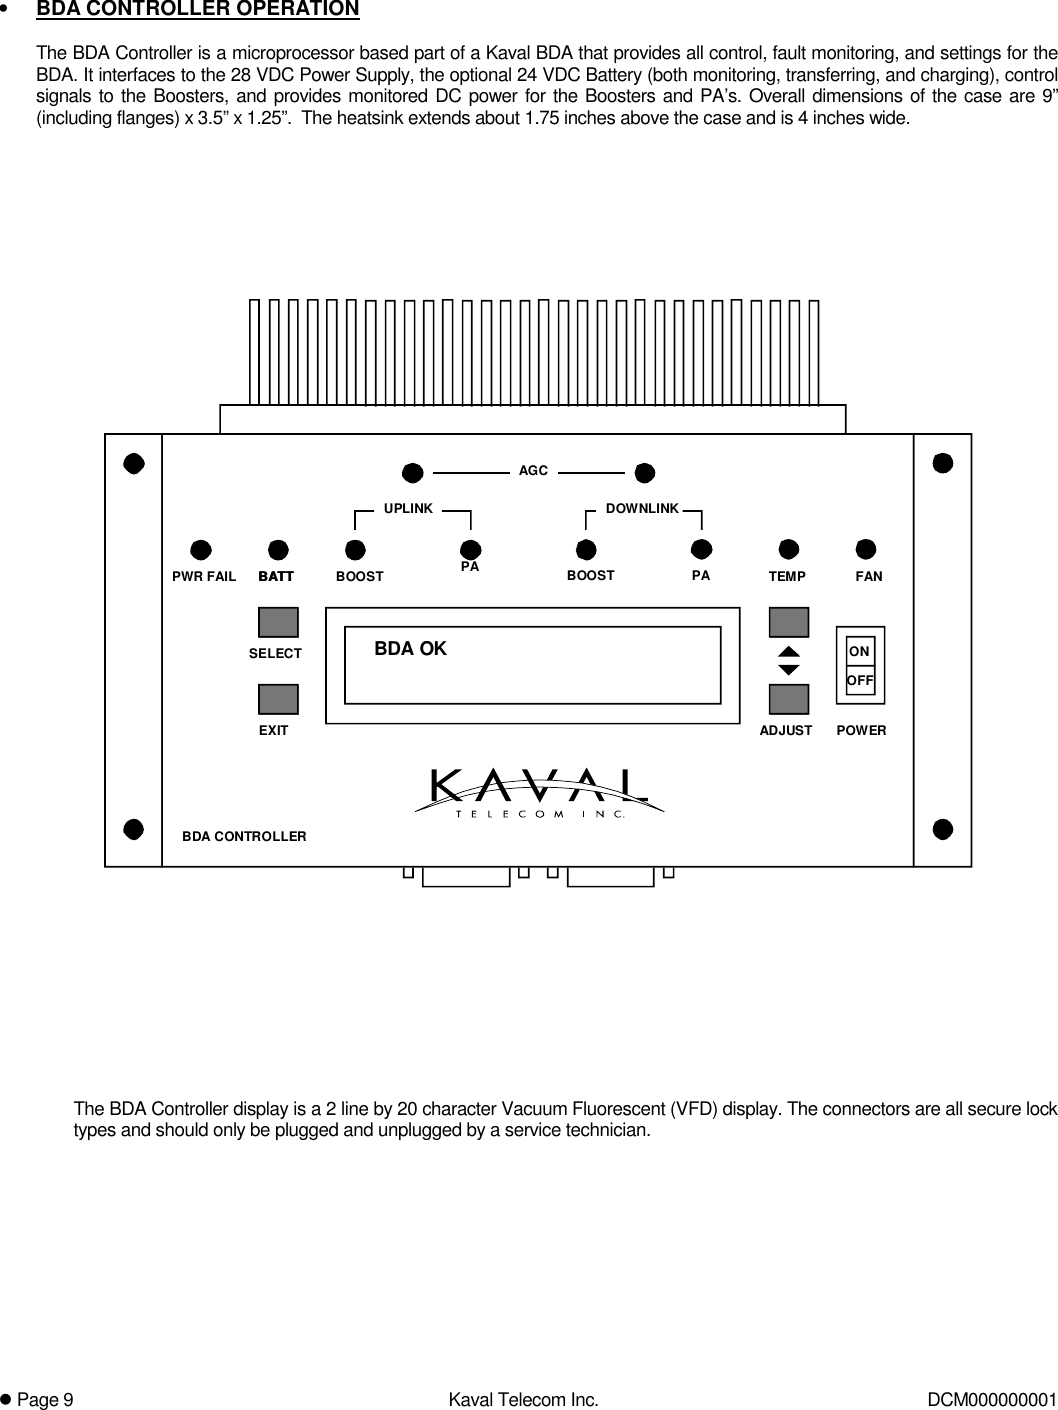 ! Page 9  Kaval Telecom Inc.  DCM000000001  •  BDA CONTROLLER OPERATION  The BDA Controller is a microprocessor based part of a Kaval BDA that provides all control, fault monitoring, and settings for the BDA. It interfaces to the 28 VDC Power Supply, the optional 24 VDC Battery (both monitoring, transferring, and charging), control signals to the Boosters, and provides monitored DC power for the Boosters and PA’s. Overall dimensions of the case are 9” (including flanges) x 3.5” x 1.25”.  The heatsink extends about 1.75 inches above the case and is 4 inches wide.    BDA OKBATT PAAGCBOOST PADOWNLINKUPLINKBDA CONTROLLERPWR FAIL TEMP FANONOFFPOWEREXITSELECTADJUSTBATT BOOST     The BDA Controller display is a 2 line by 20 character Vacuum Fluorescent (VFD) display. The connectors are all secure lock types and should only be plugged and unplugged by a service technician. 